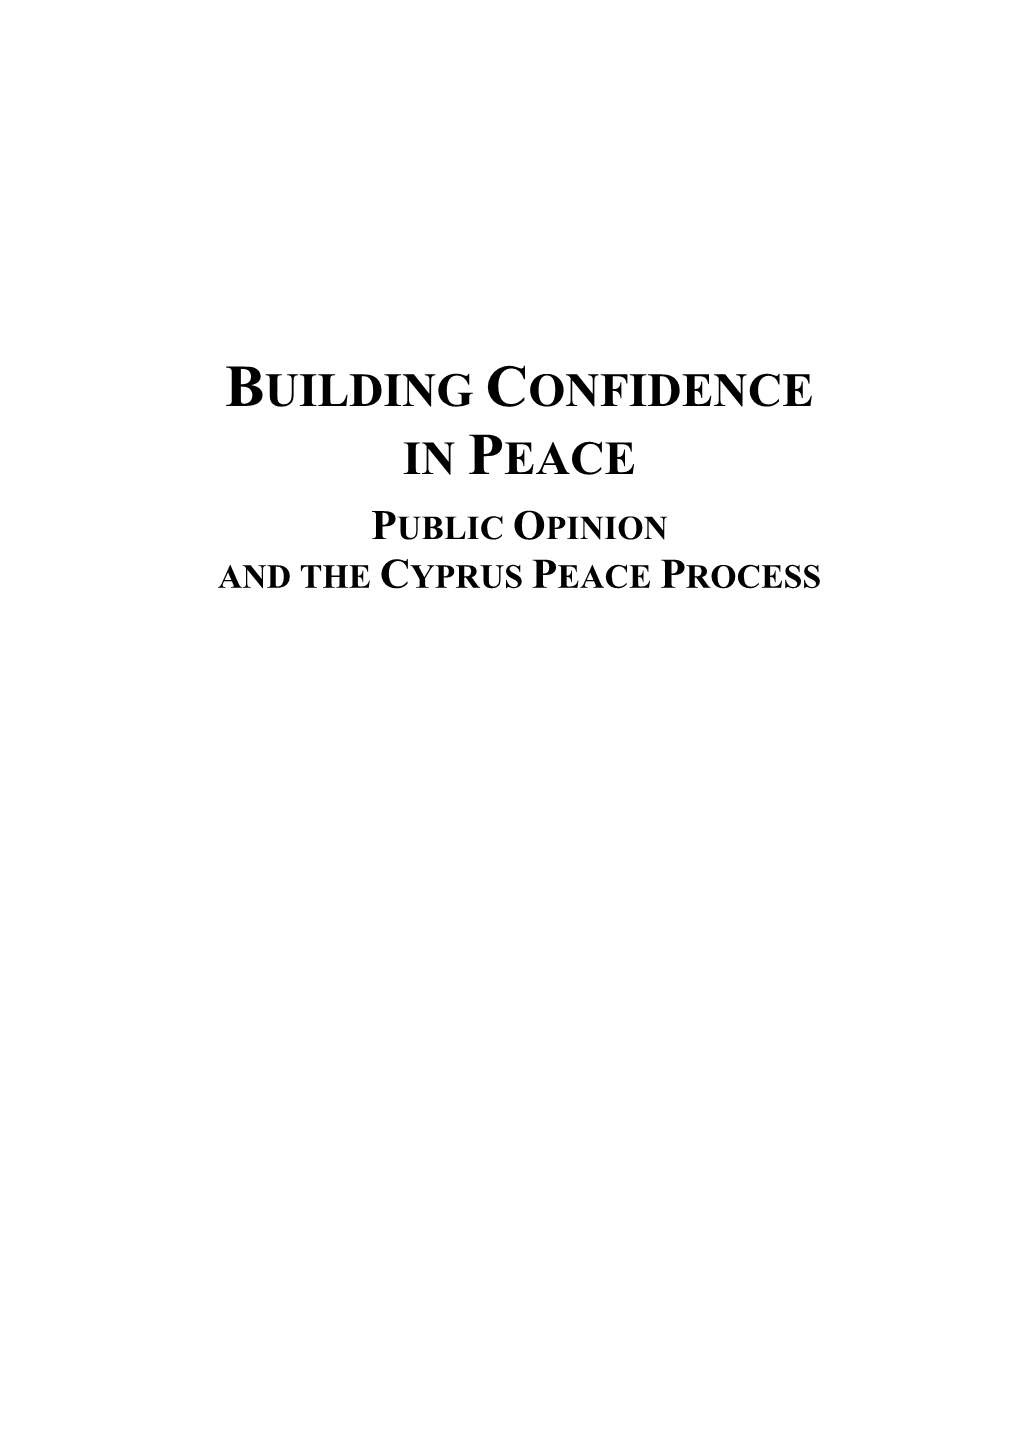 Building Confidence in Peace: Public Opinion and the Cyprus Peace Process